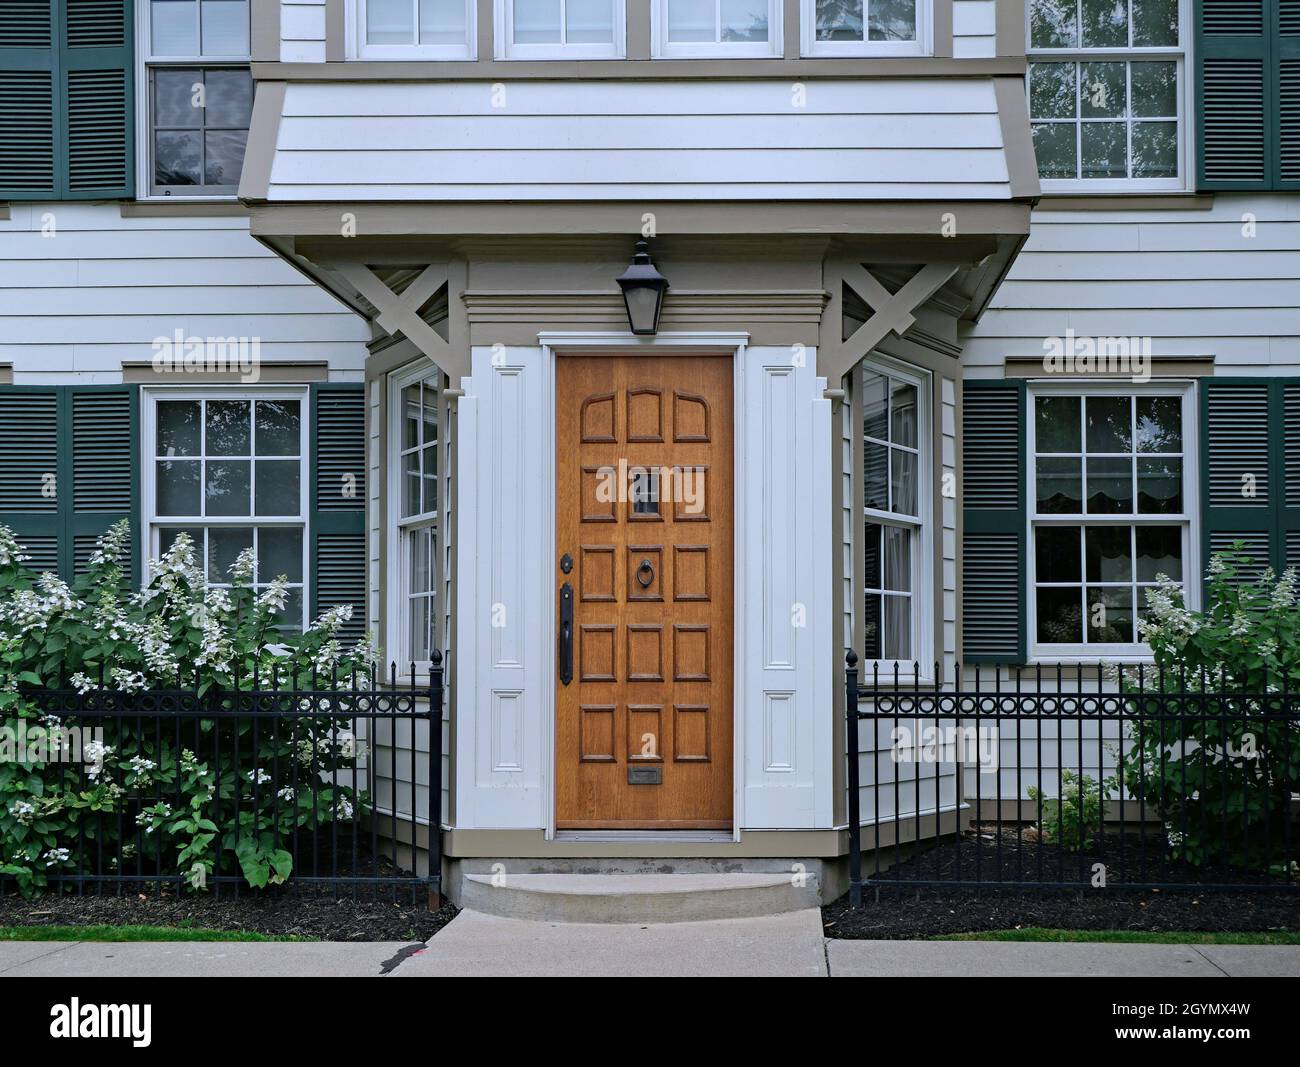 Wood grain front door of old fashioned white clapboard house with shutters Stock Photo